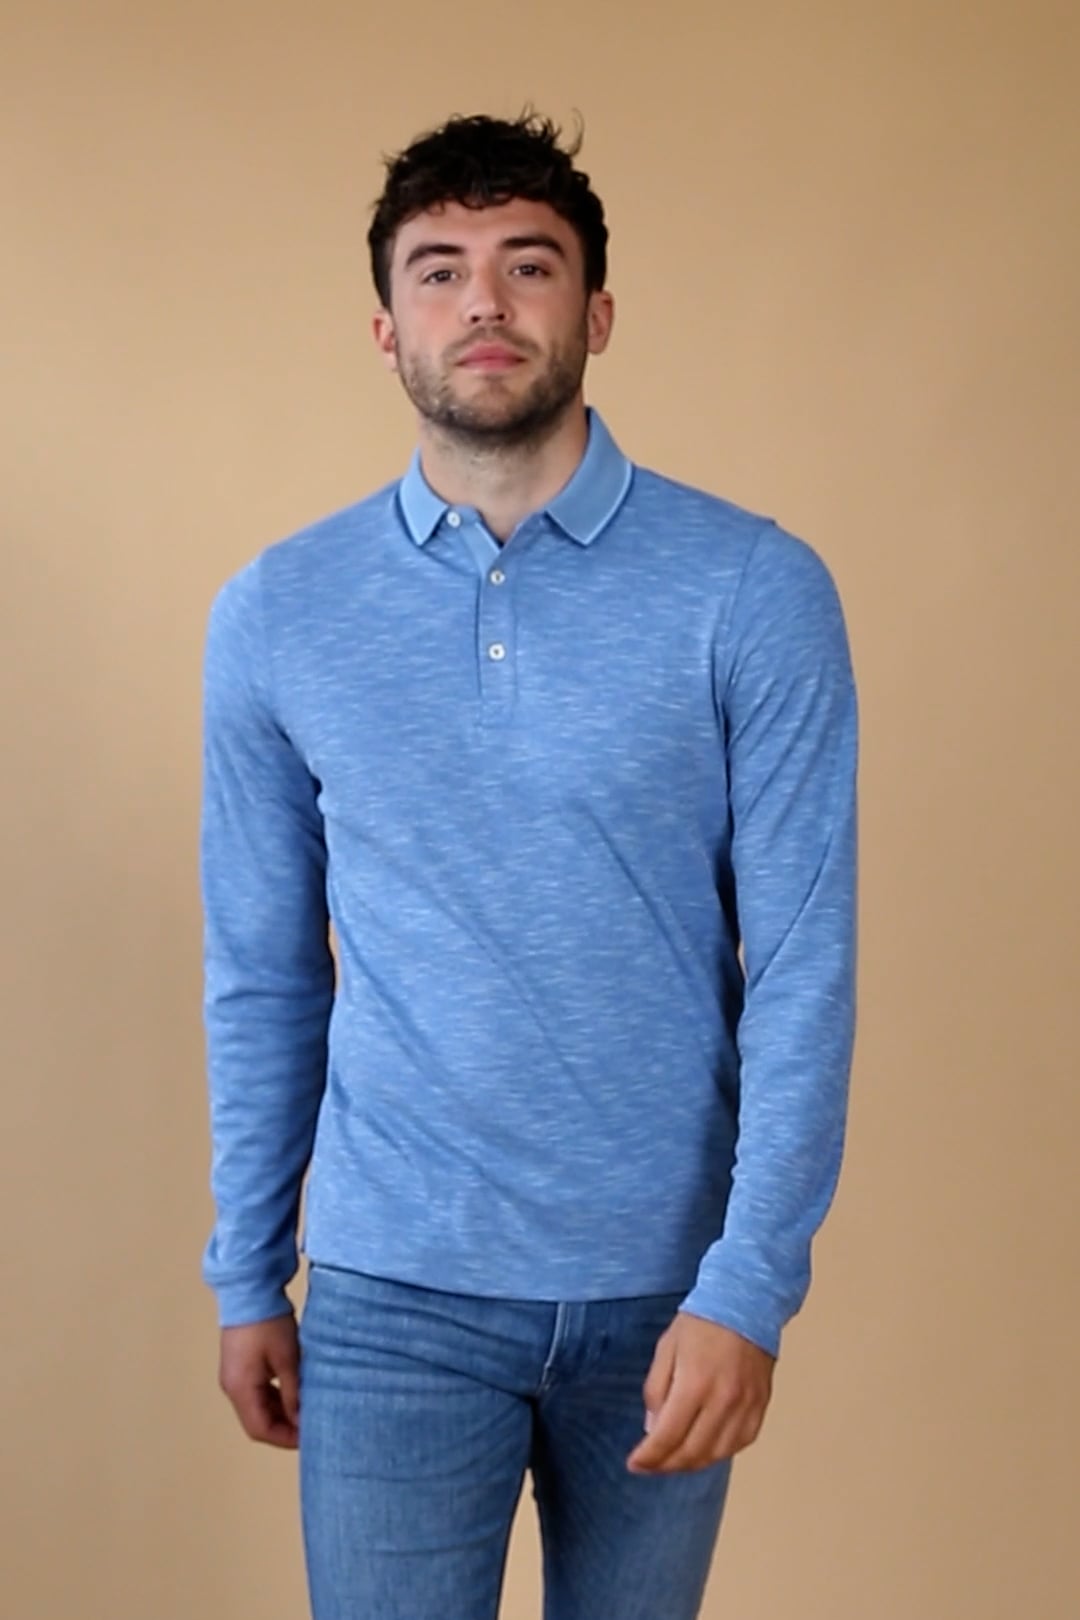 Suitable Long Sleeve Polo Blue 3485-16 Mid blue order online | Suitable